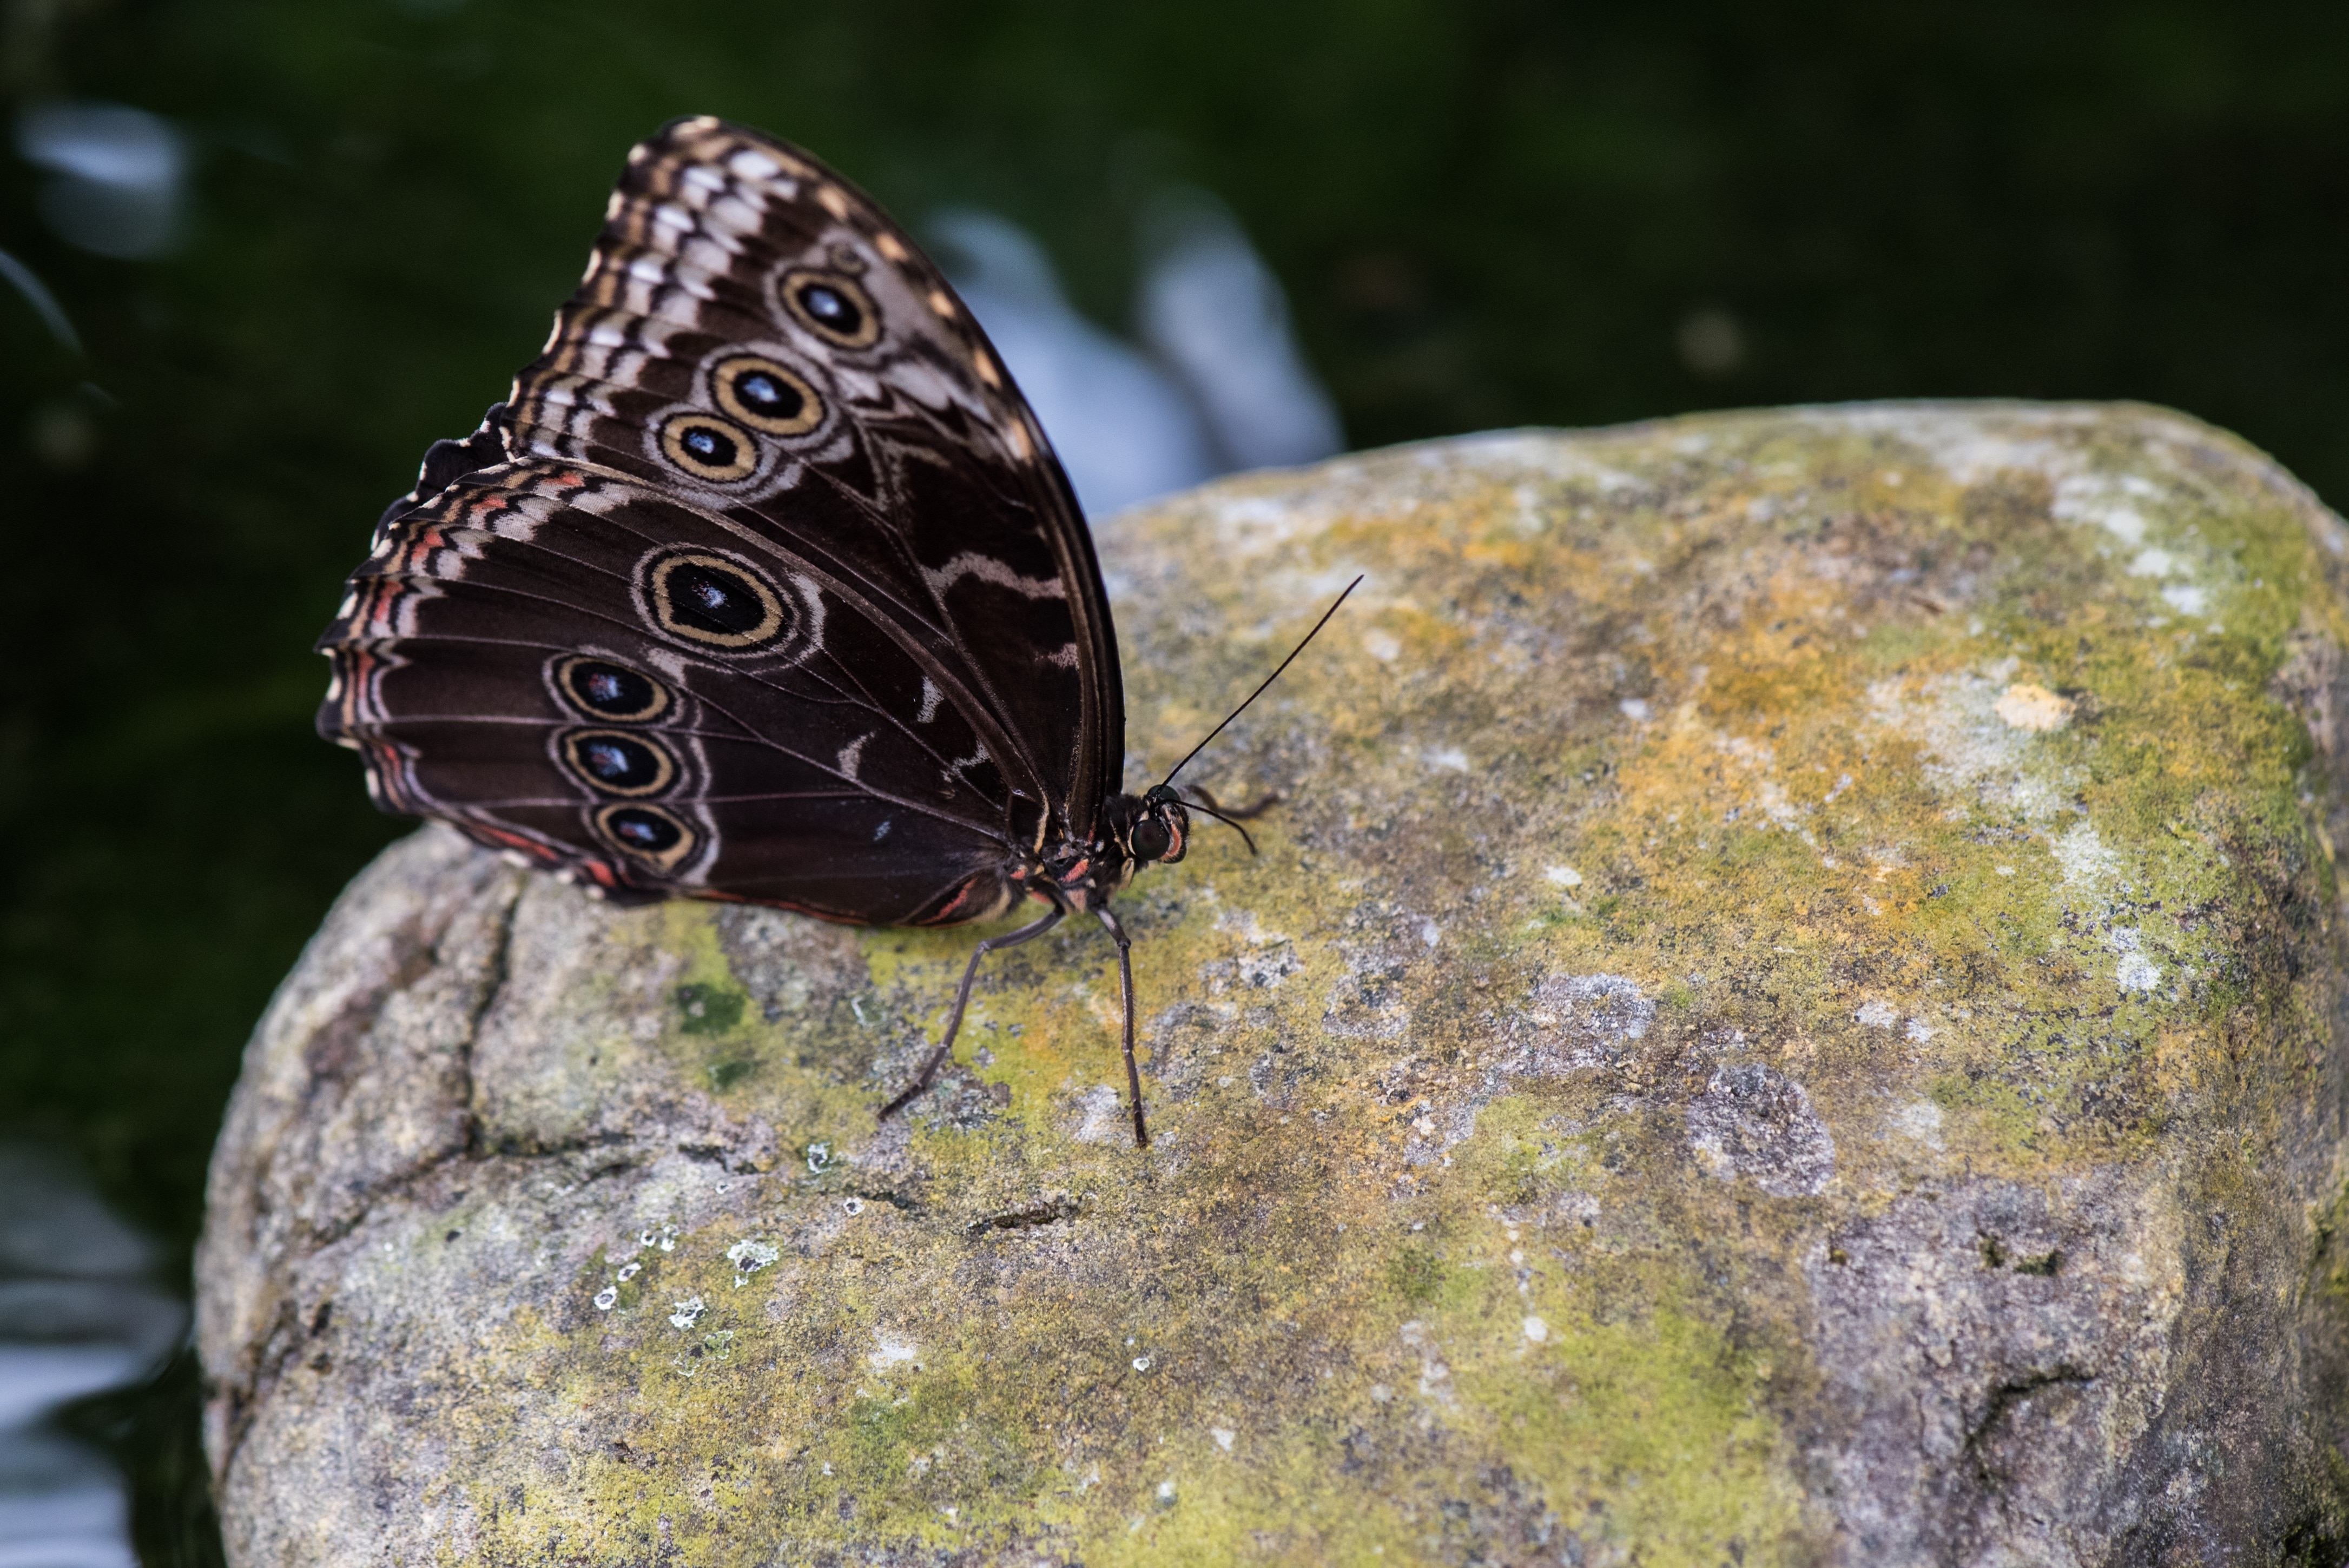 Green, Pose, Plant, Macro, Butterfly, rock - object, insect